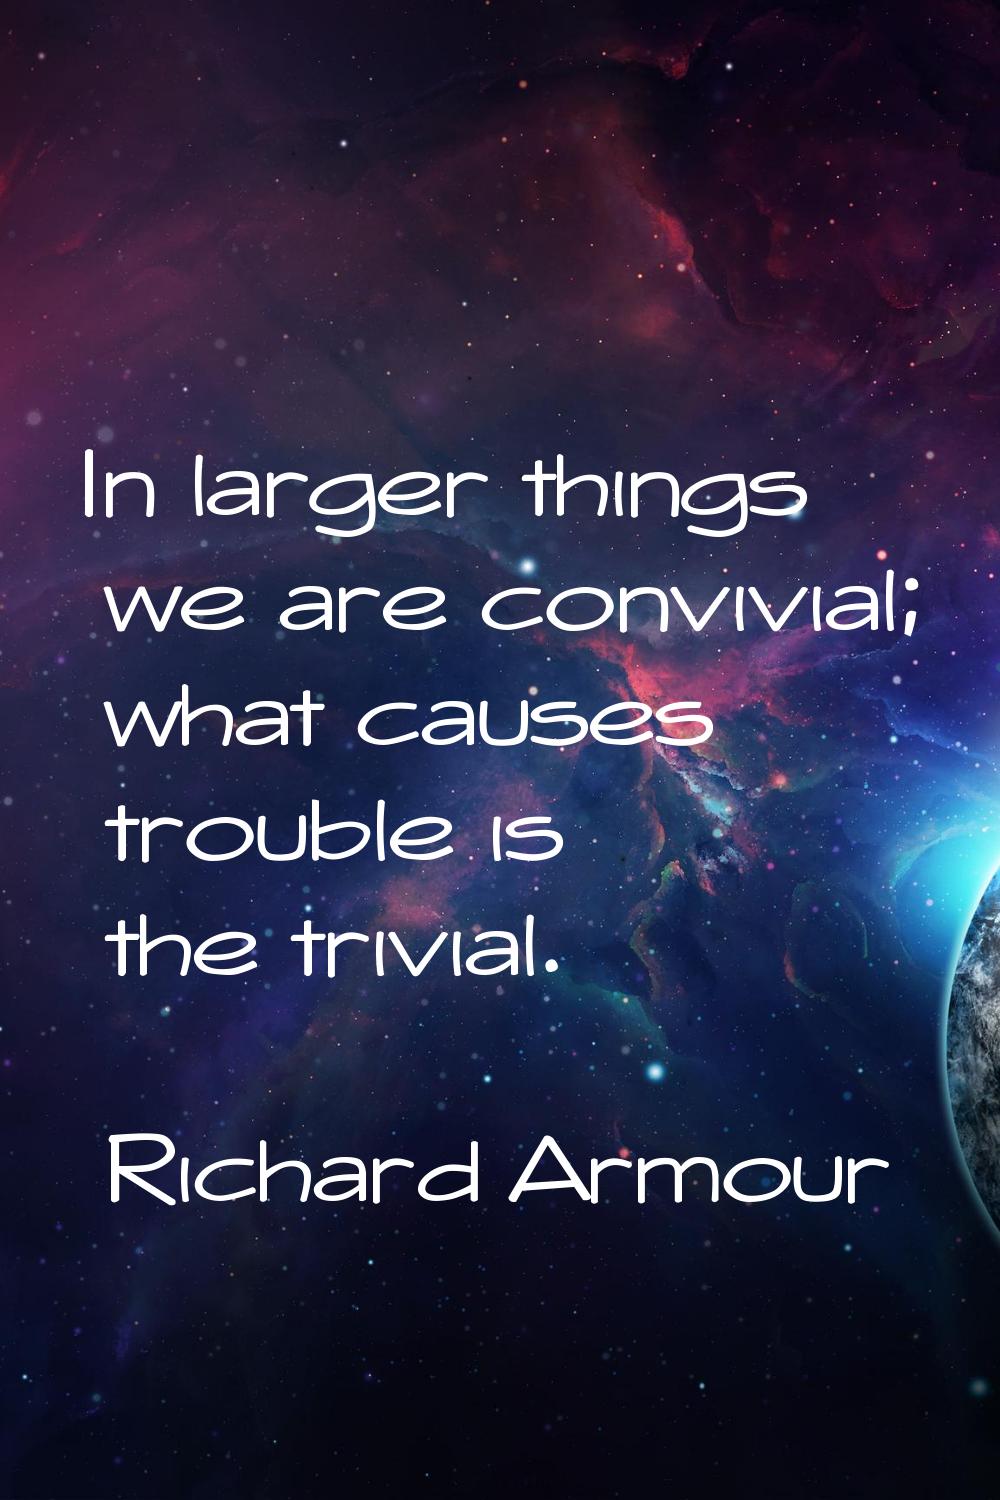 In larger things we are convivial; what causes trouble is the trivial.